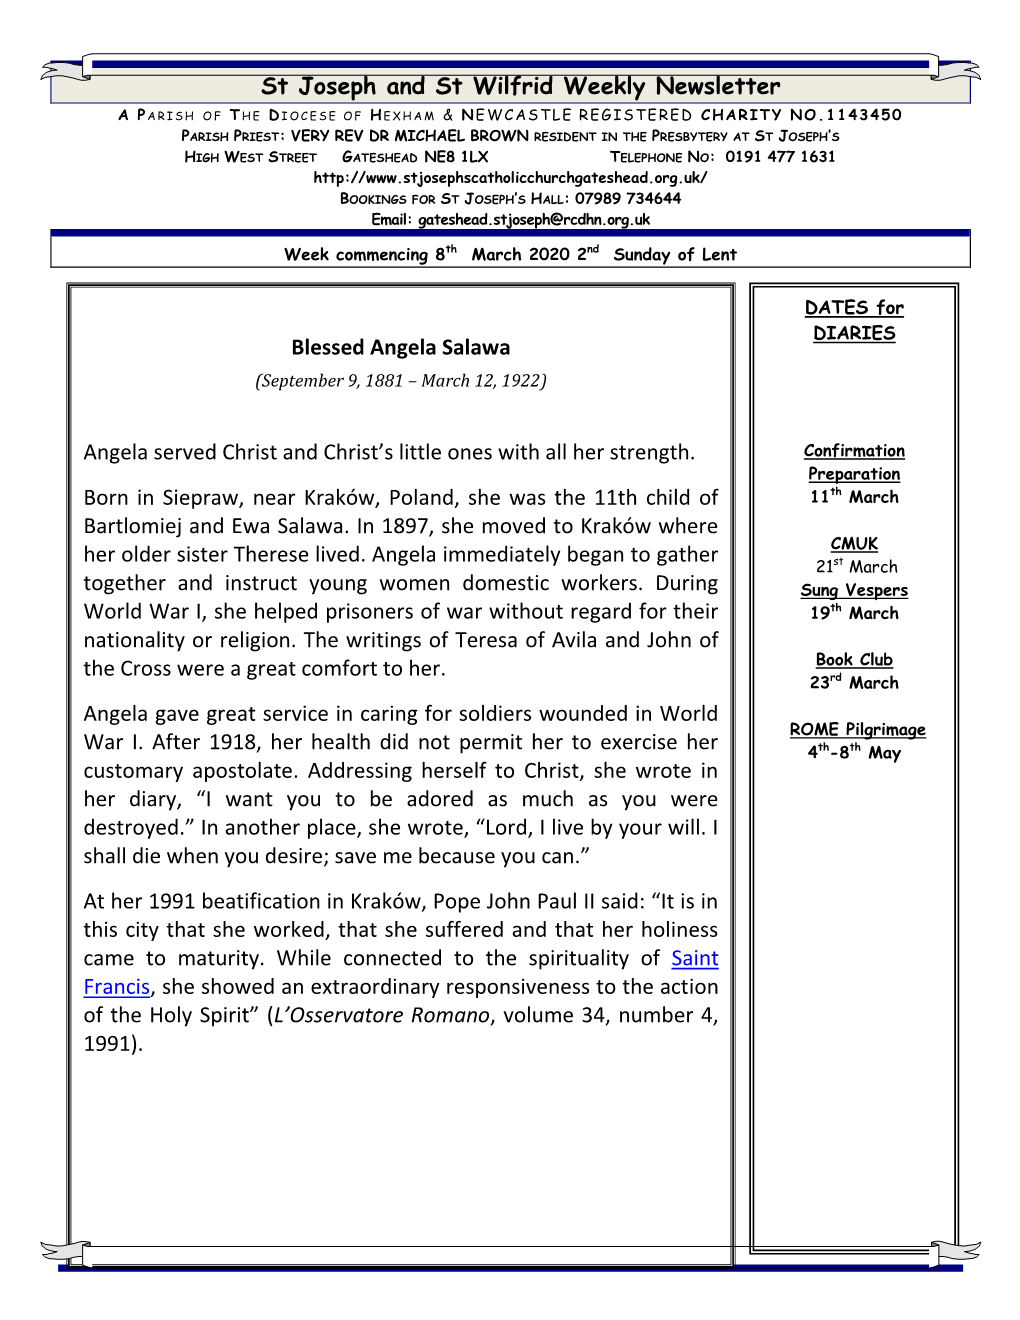 St Joseph and St Wilfrid Weekly Newsletter Blessed Angela Salawa